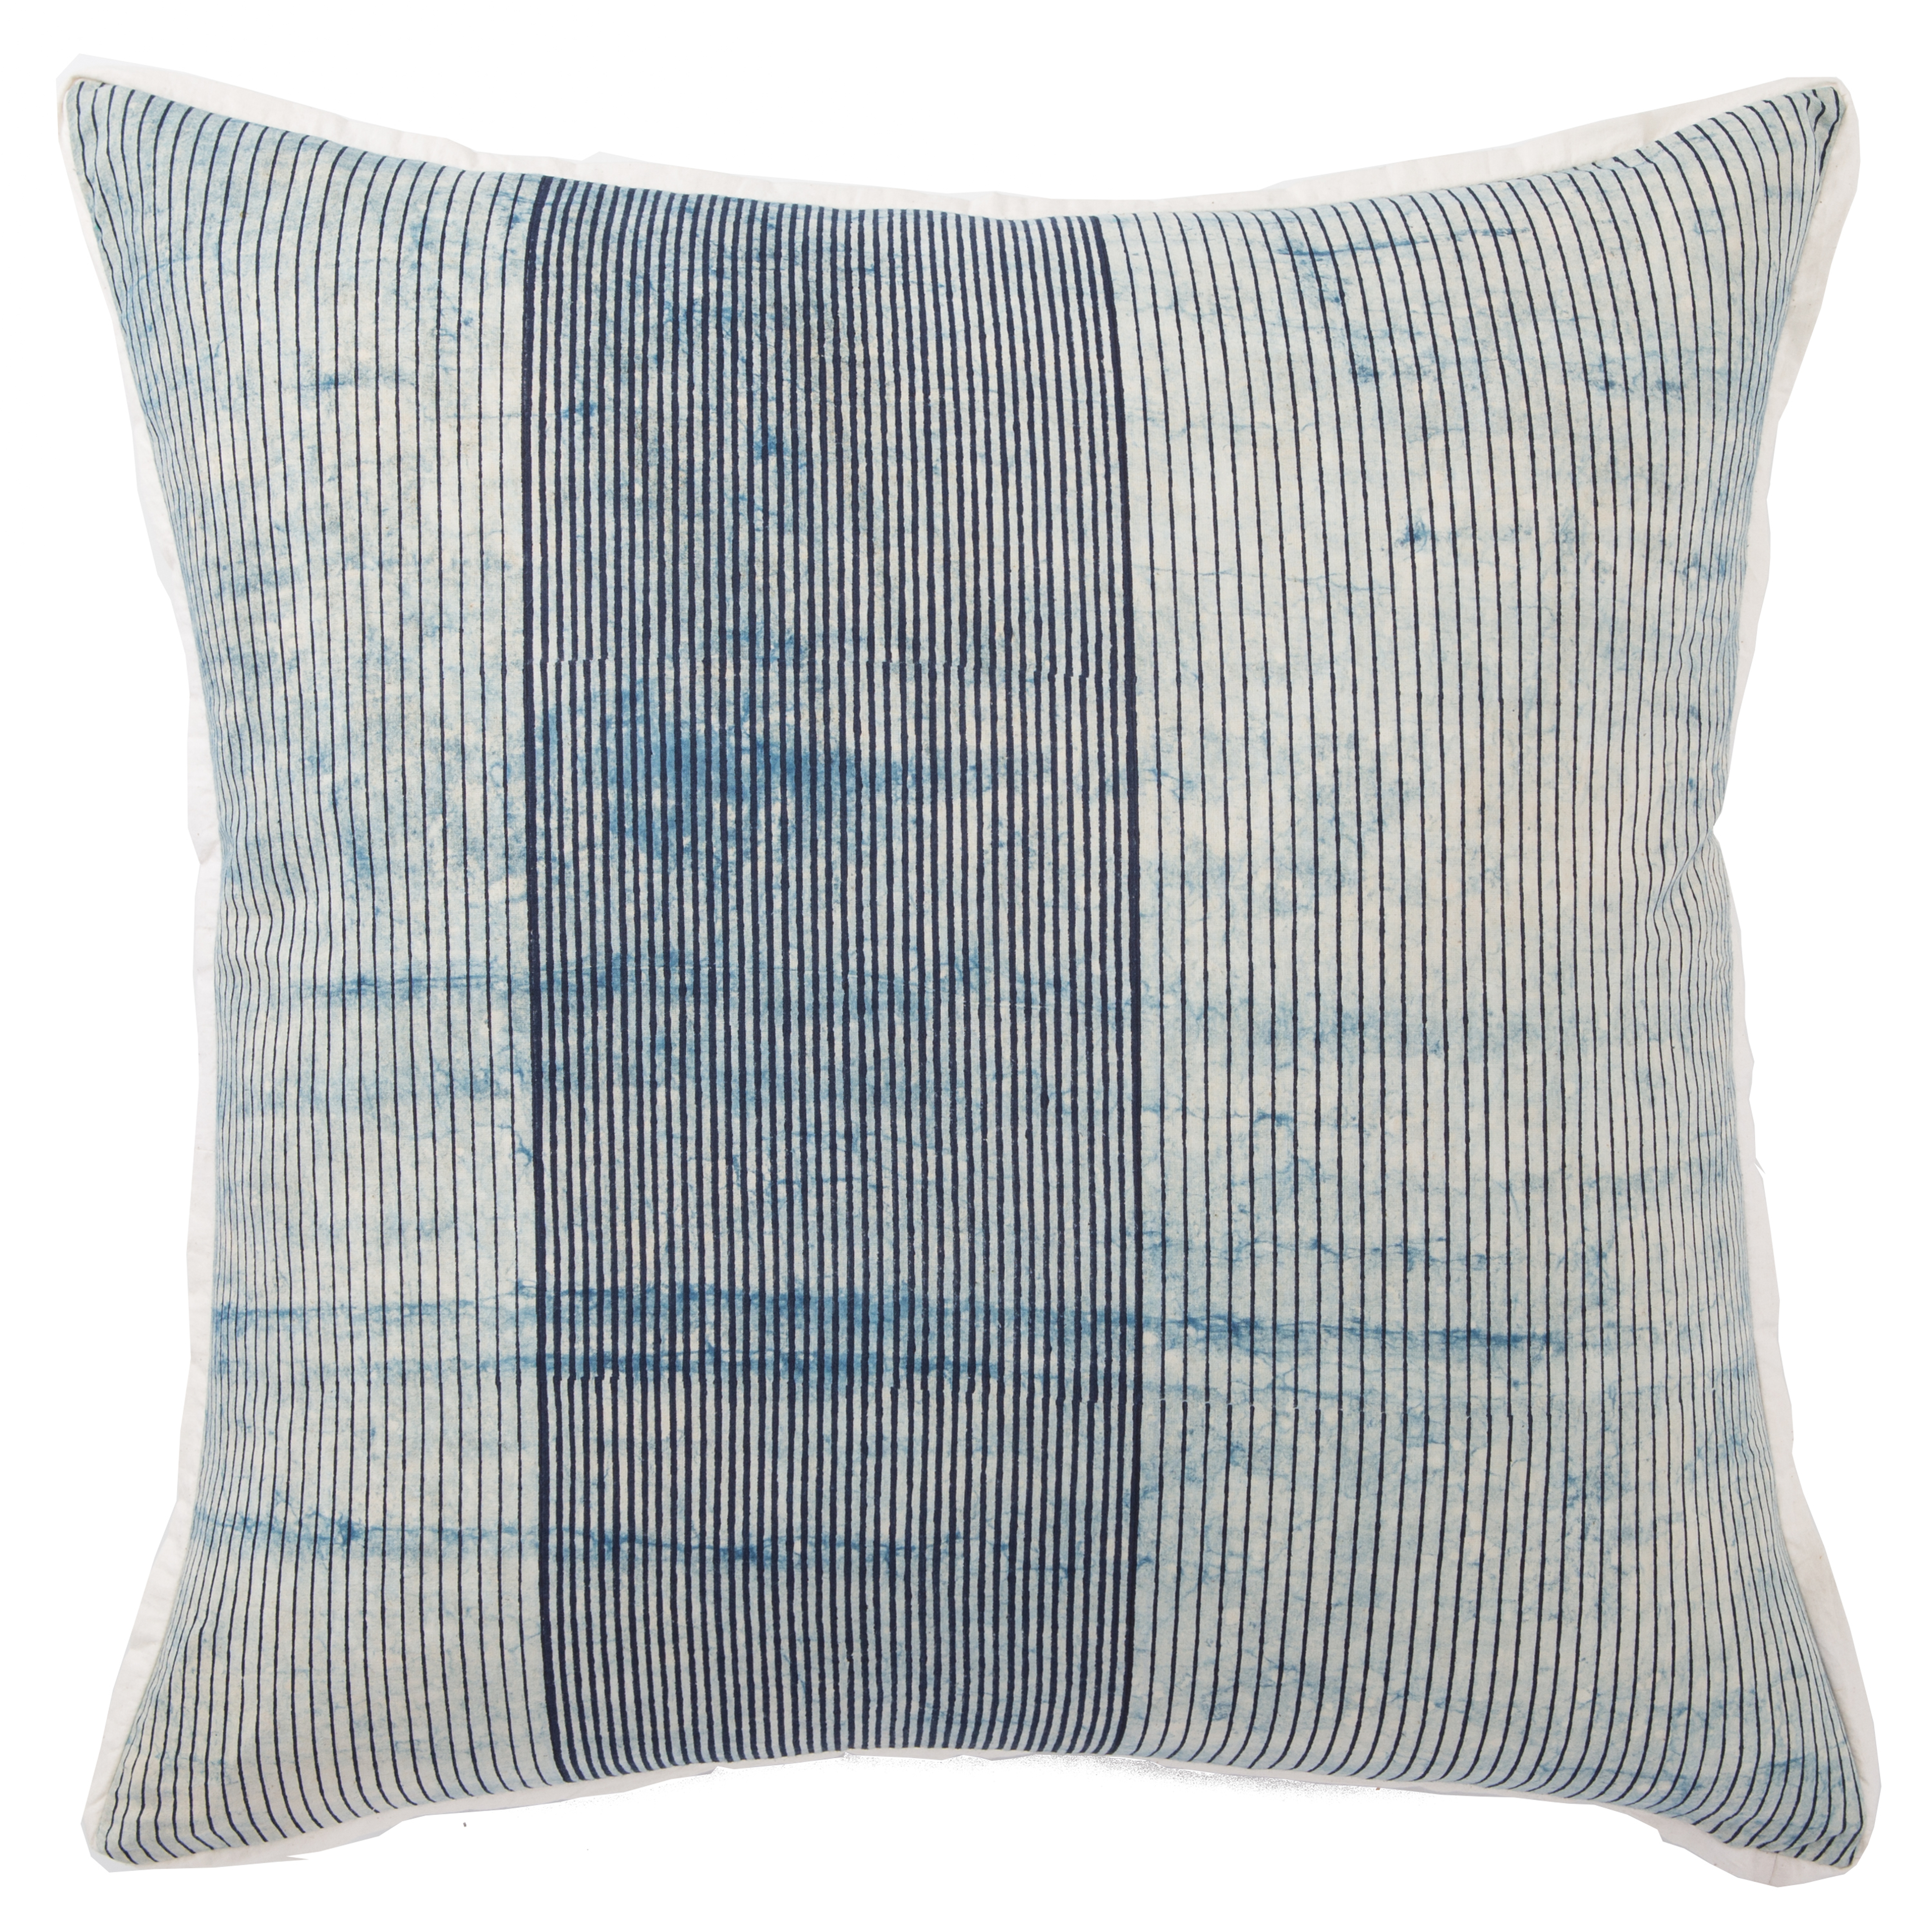 Alicia Pillow - Polyester Insert - Collective Weavers